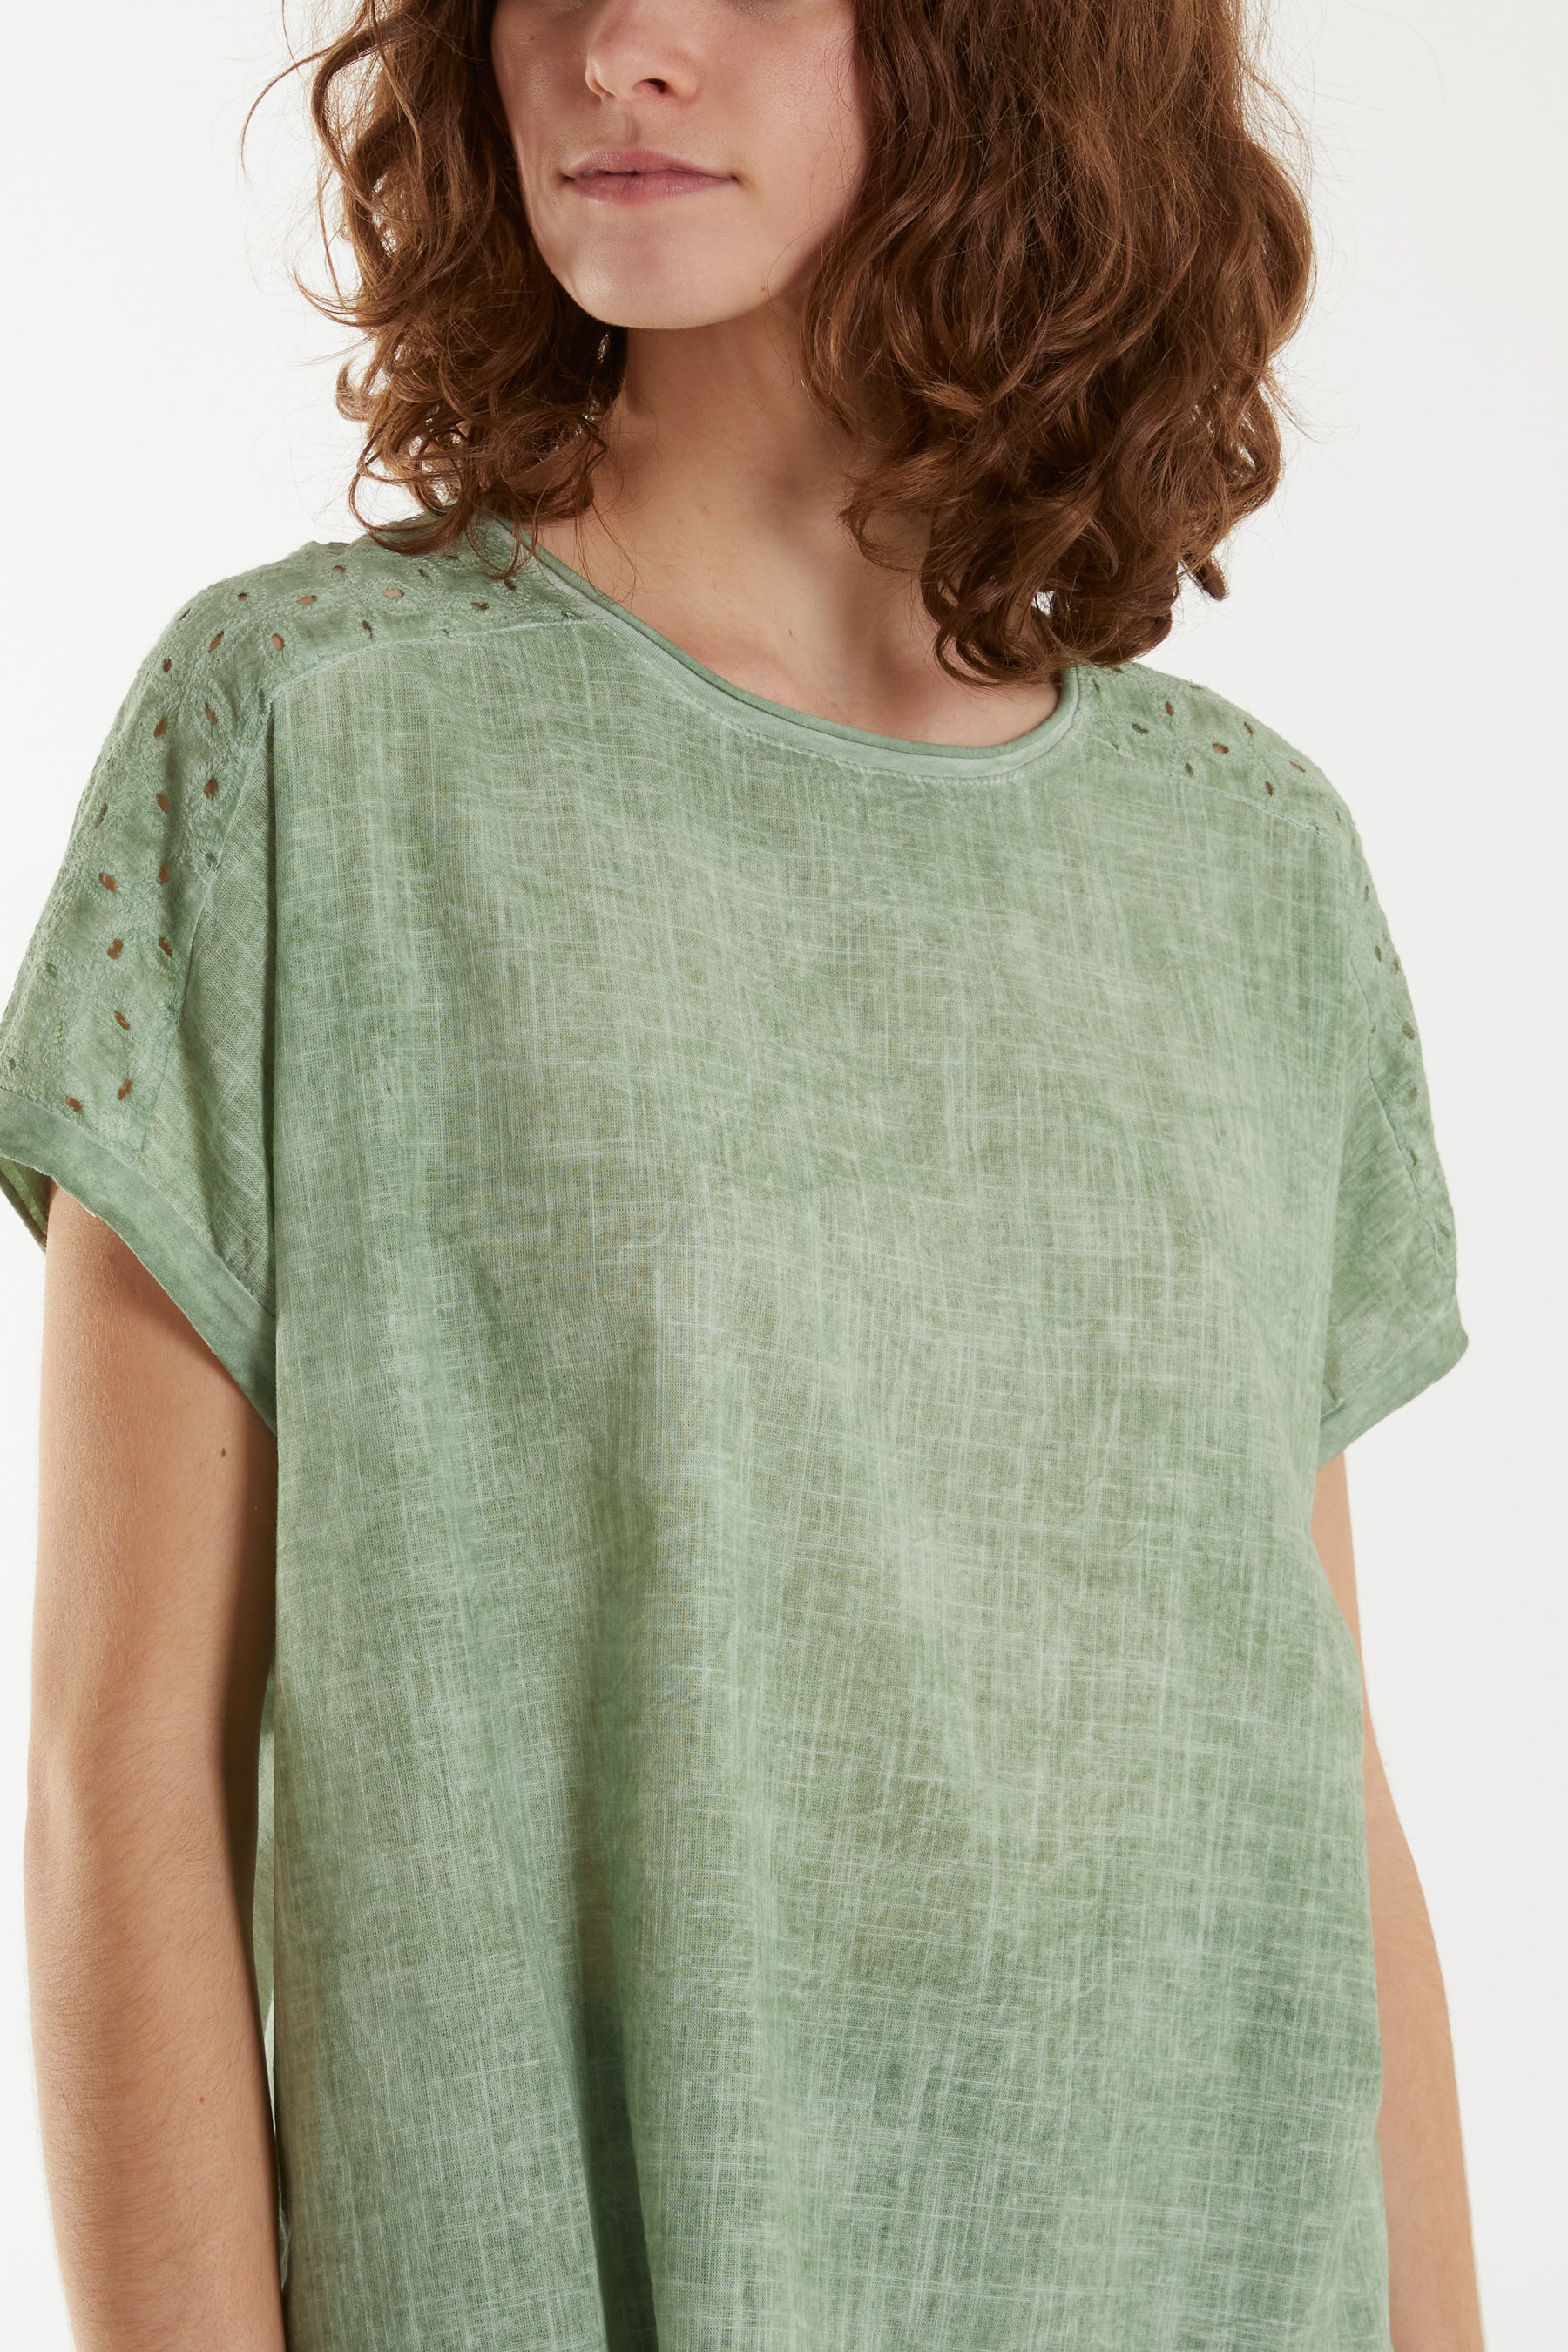 Stone Wash Broderie Anglaise Shoulder Top